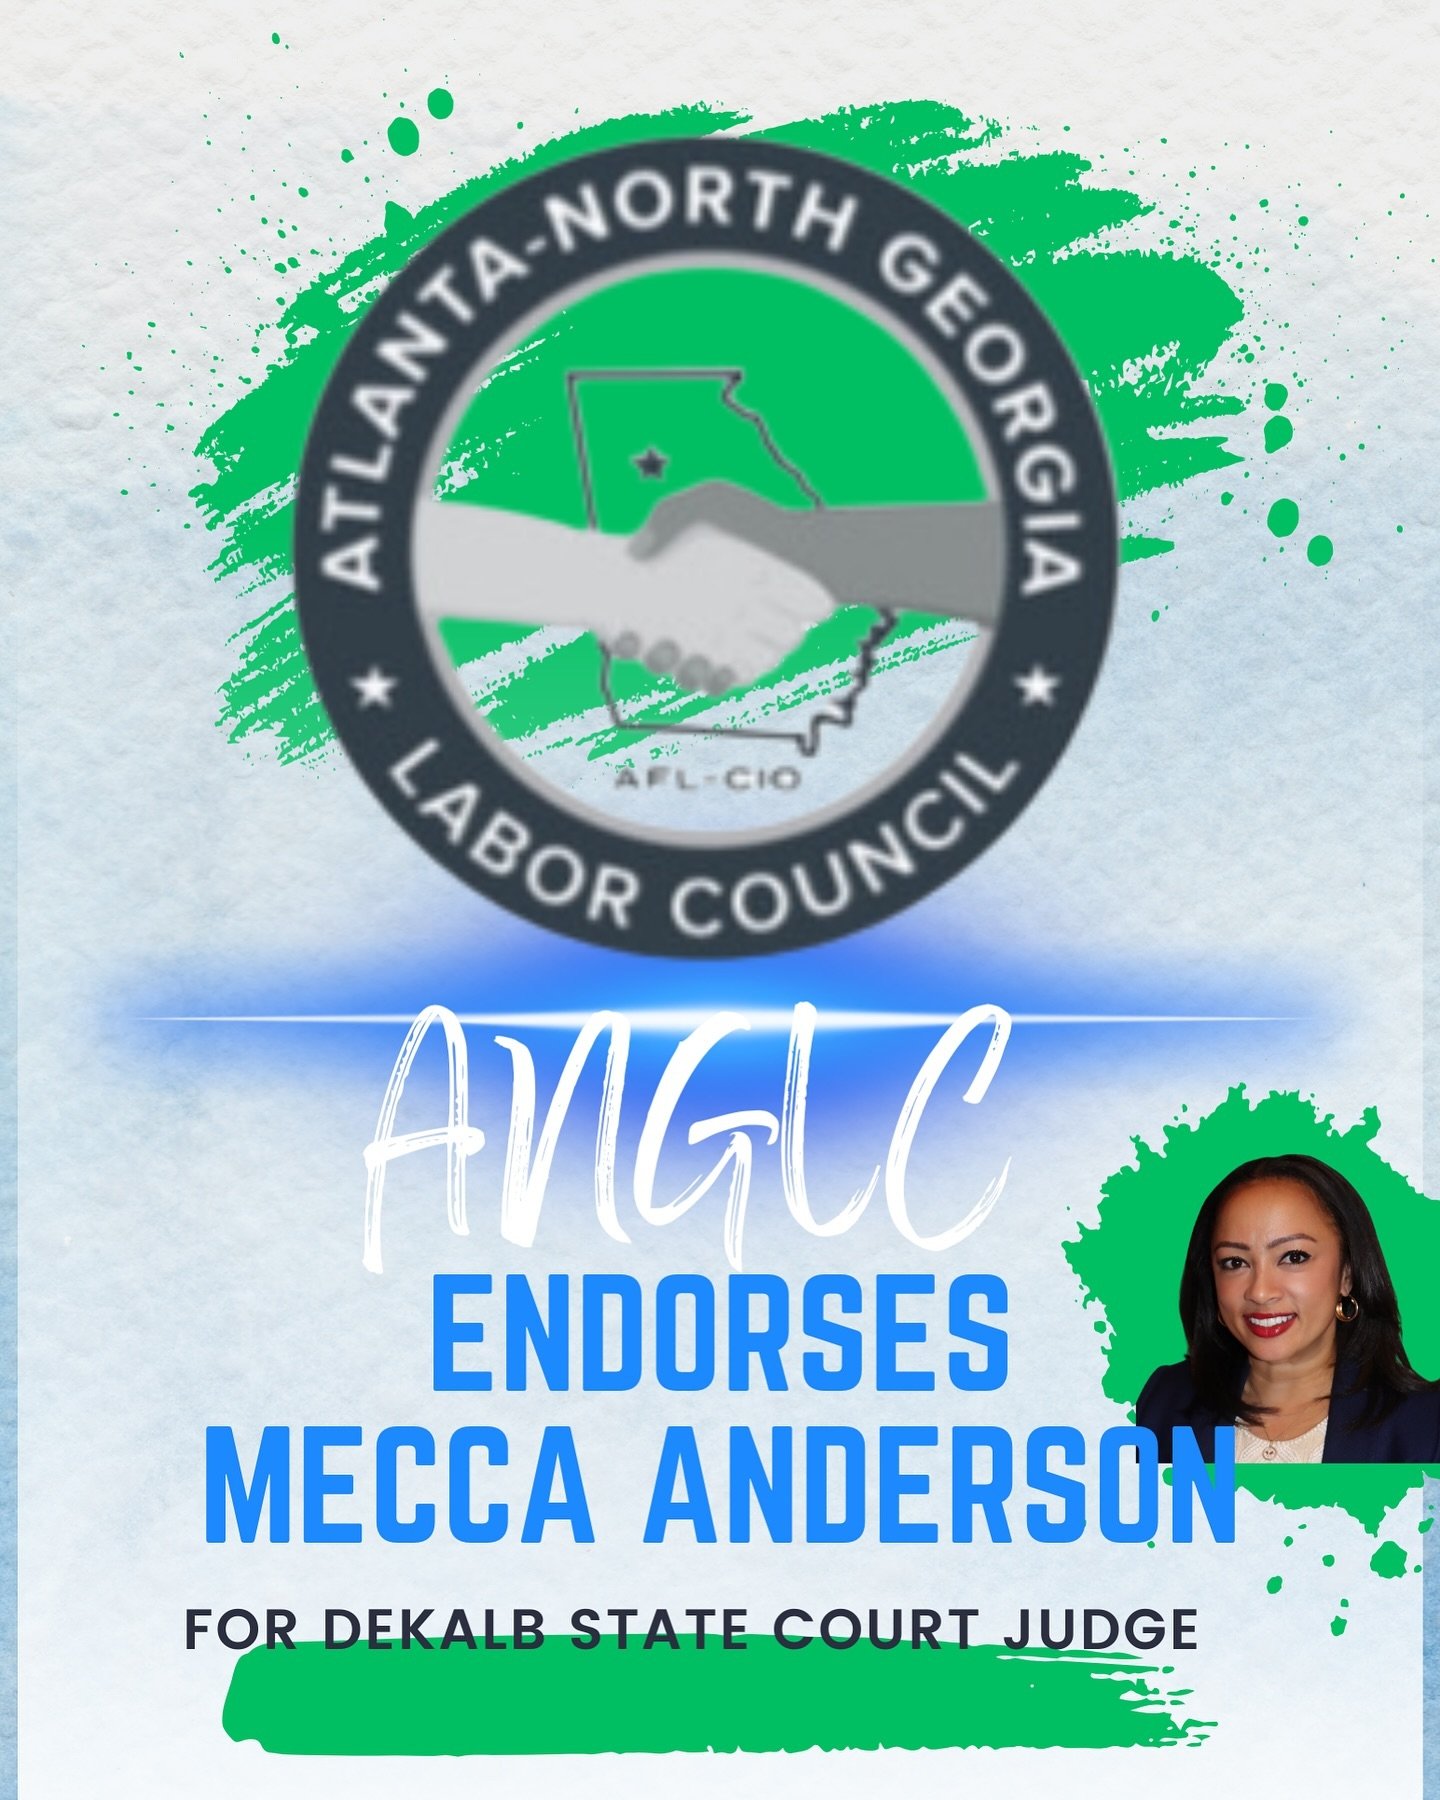 The Atlanta North Georgia Labor Council is a prominent organization dedicated to advocating for workers&rsquo; rights and promoting fair labor practices in the region. Their mission is to ensure that all workers are treated with dignity and respect i